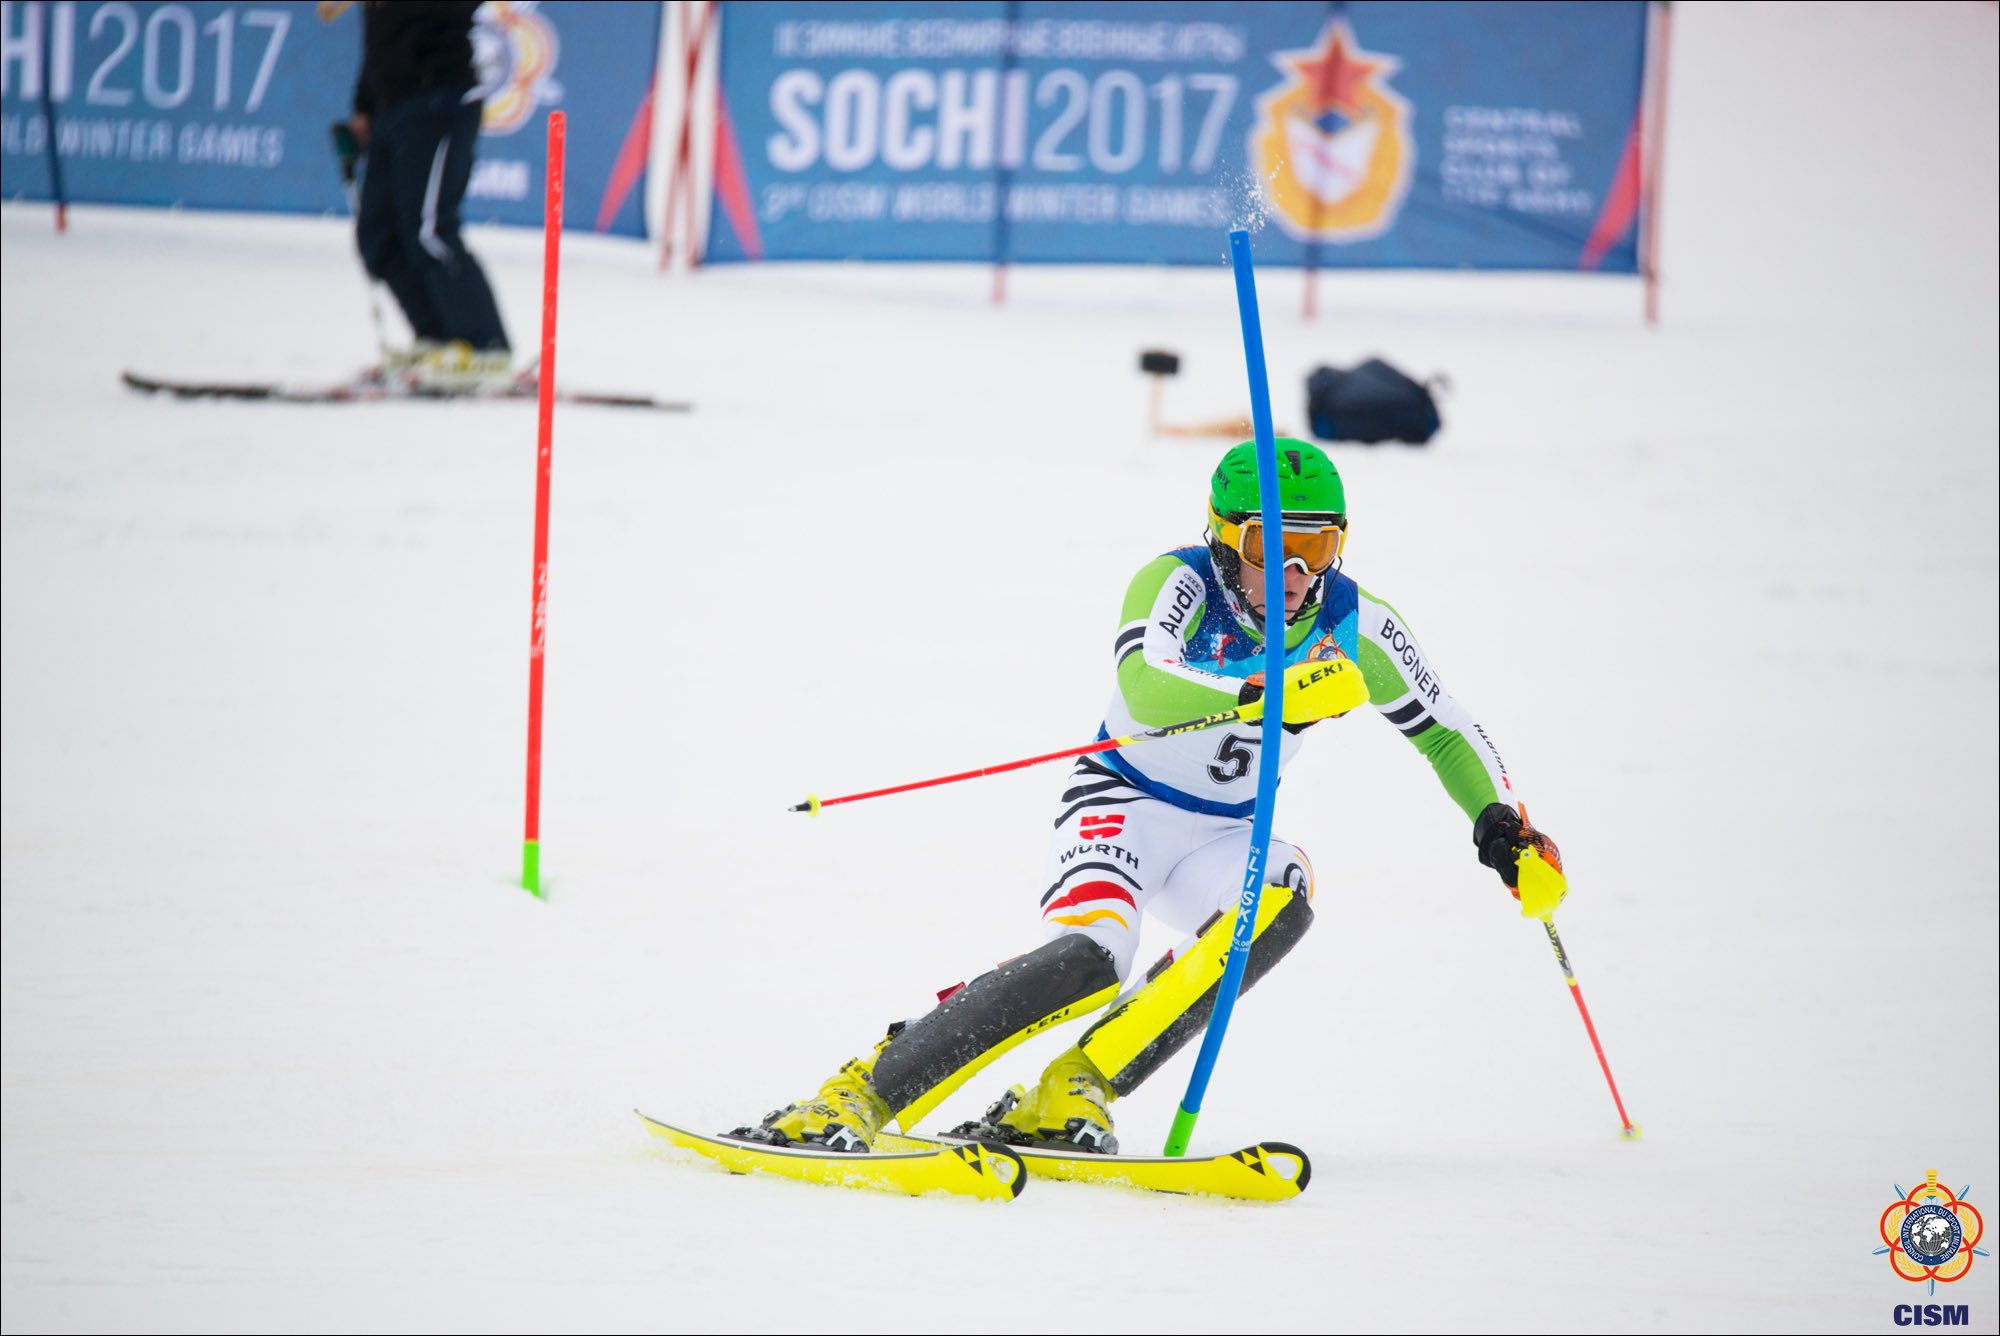 3rd CISM World Winter Games : Second day of competition